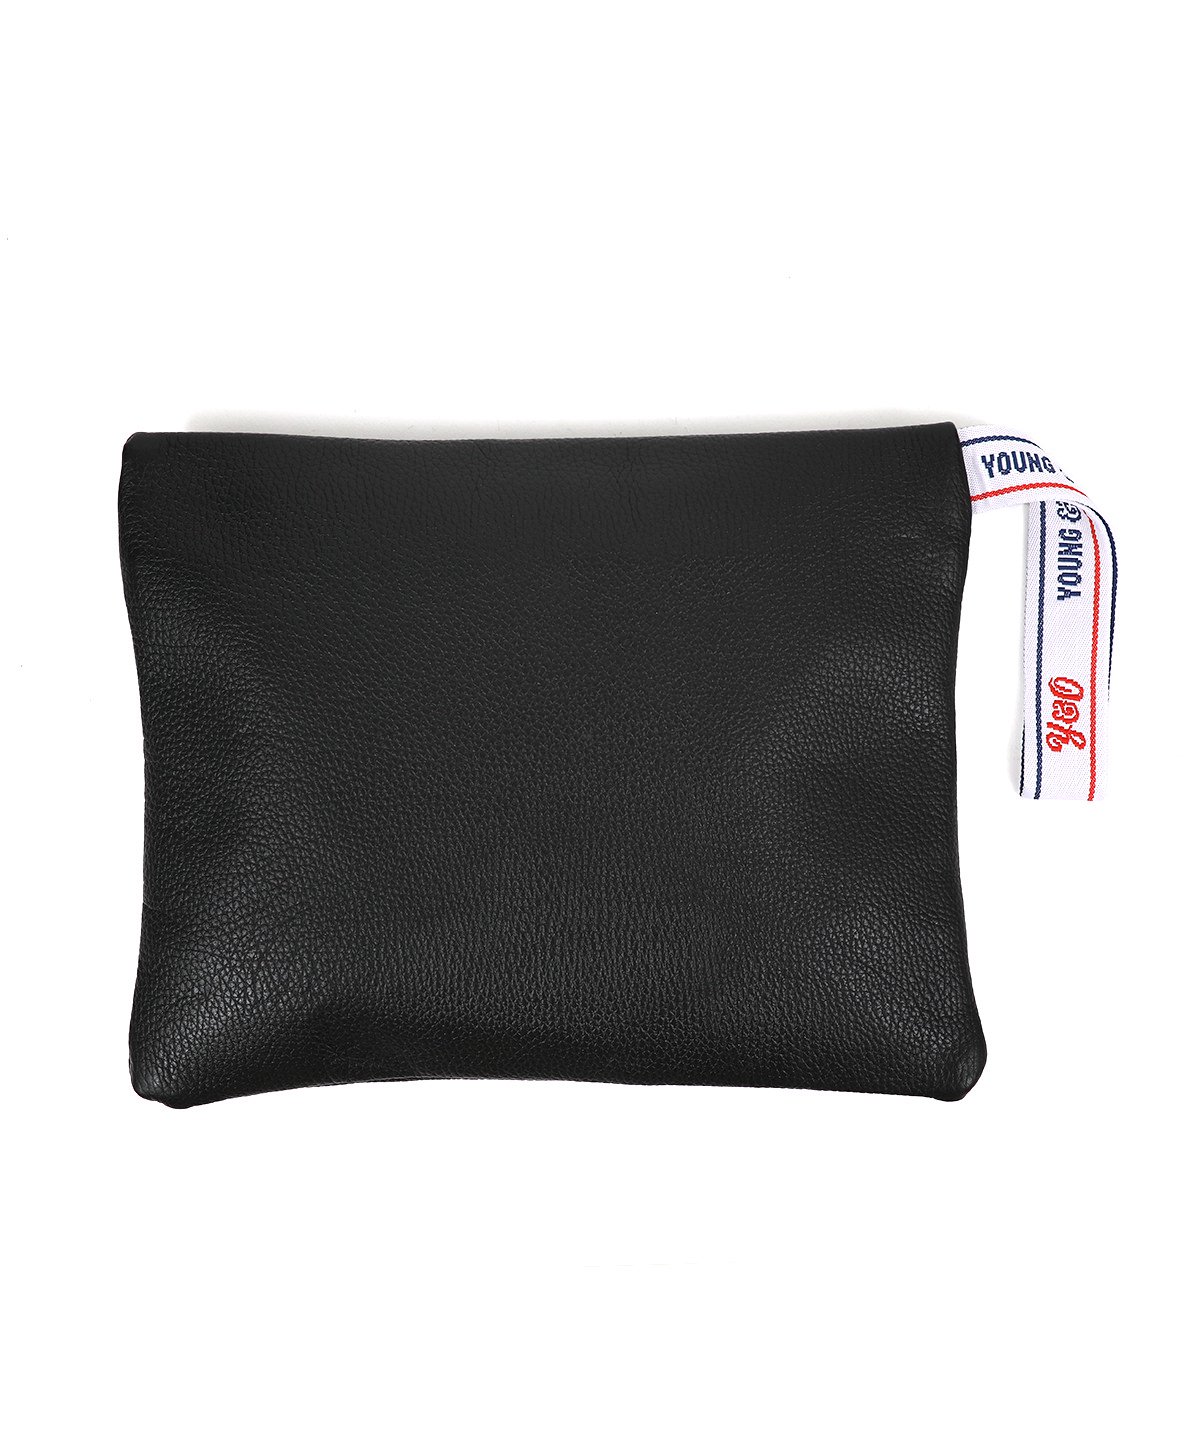 Y&O LEATHER POUCH L